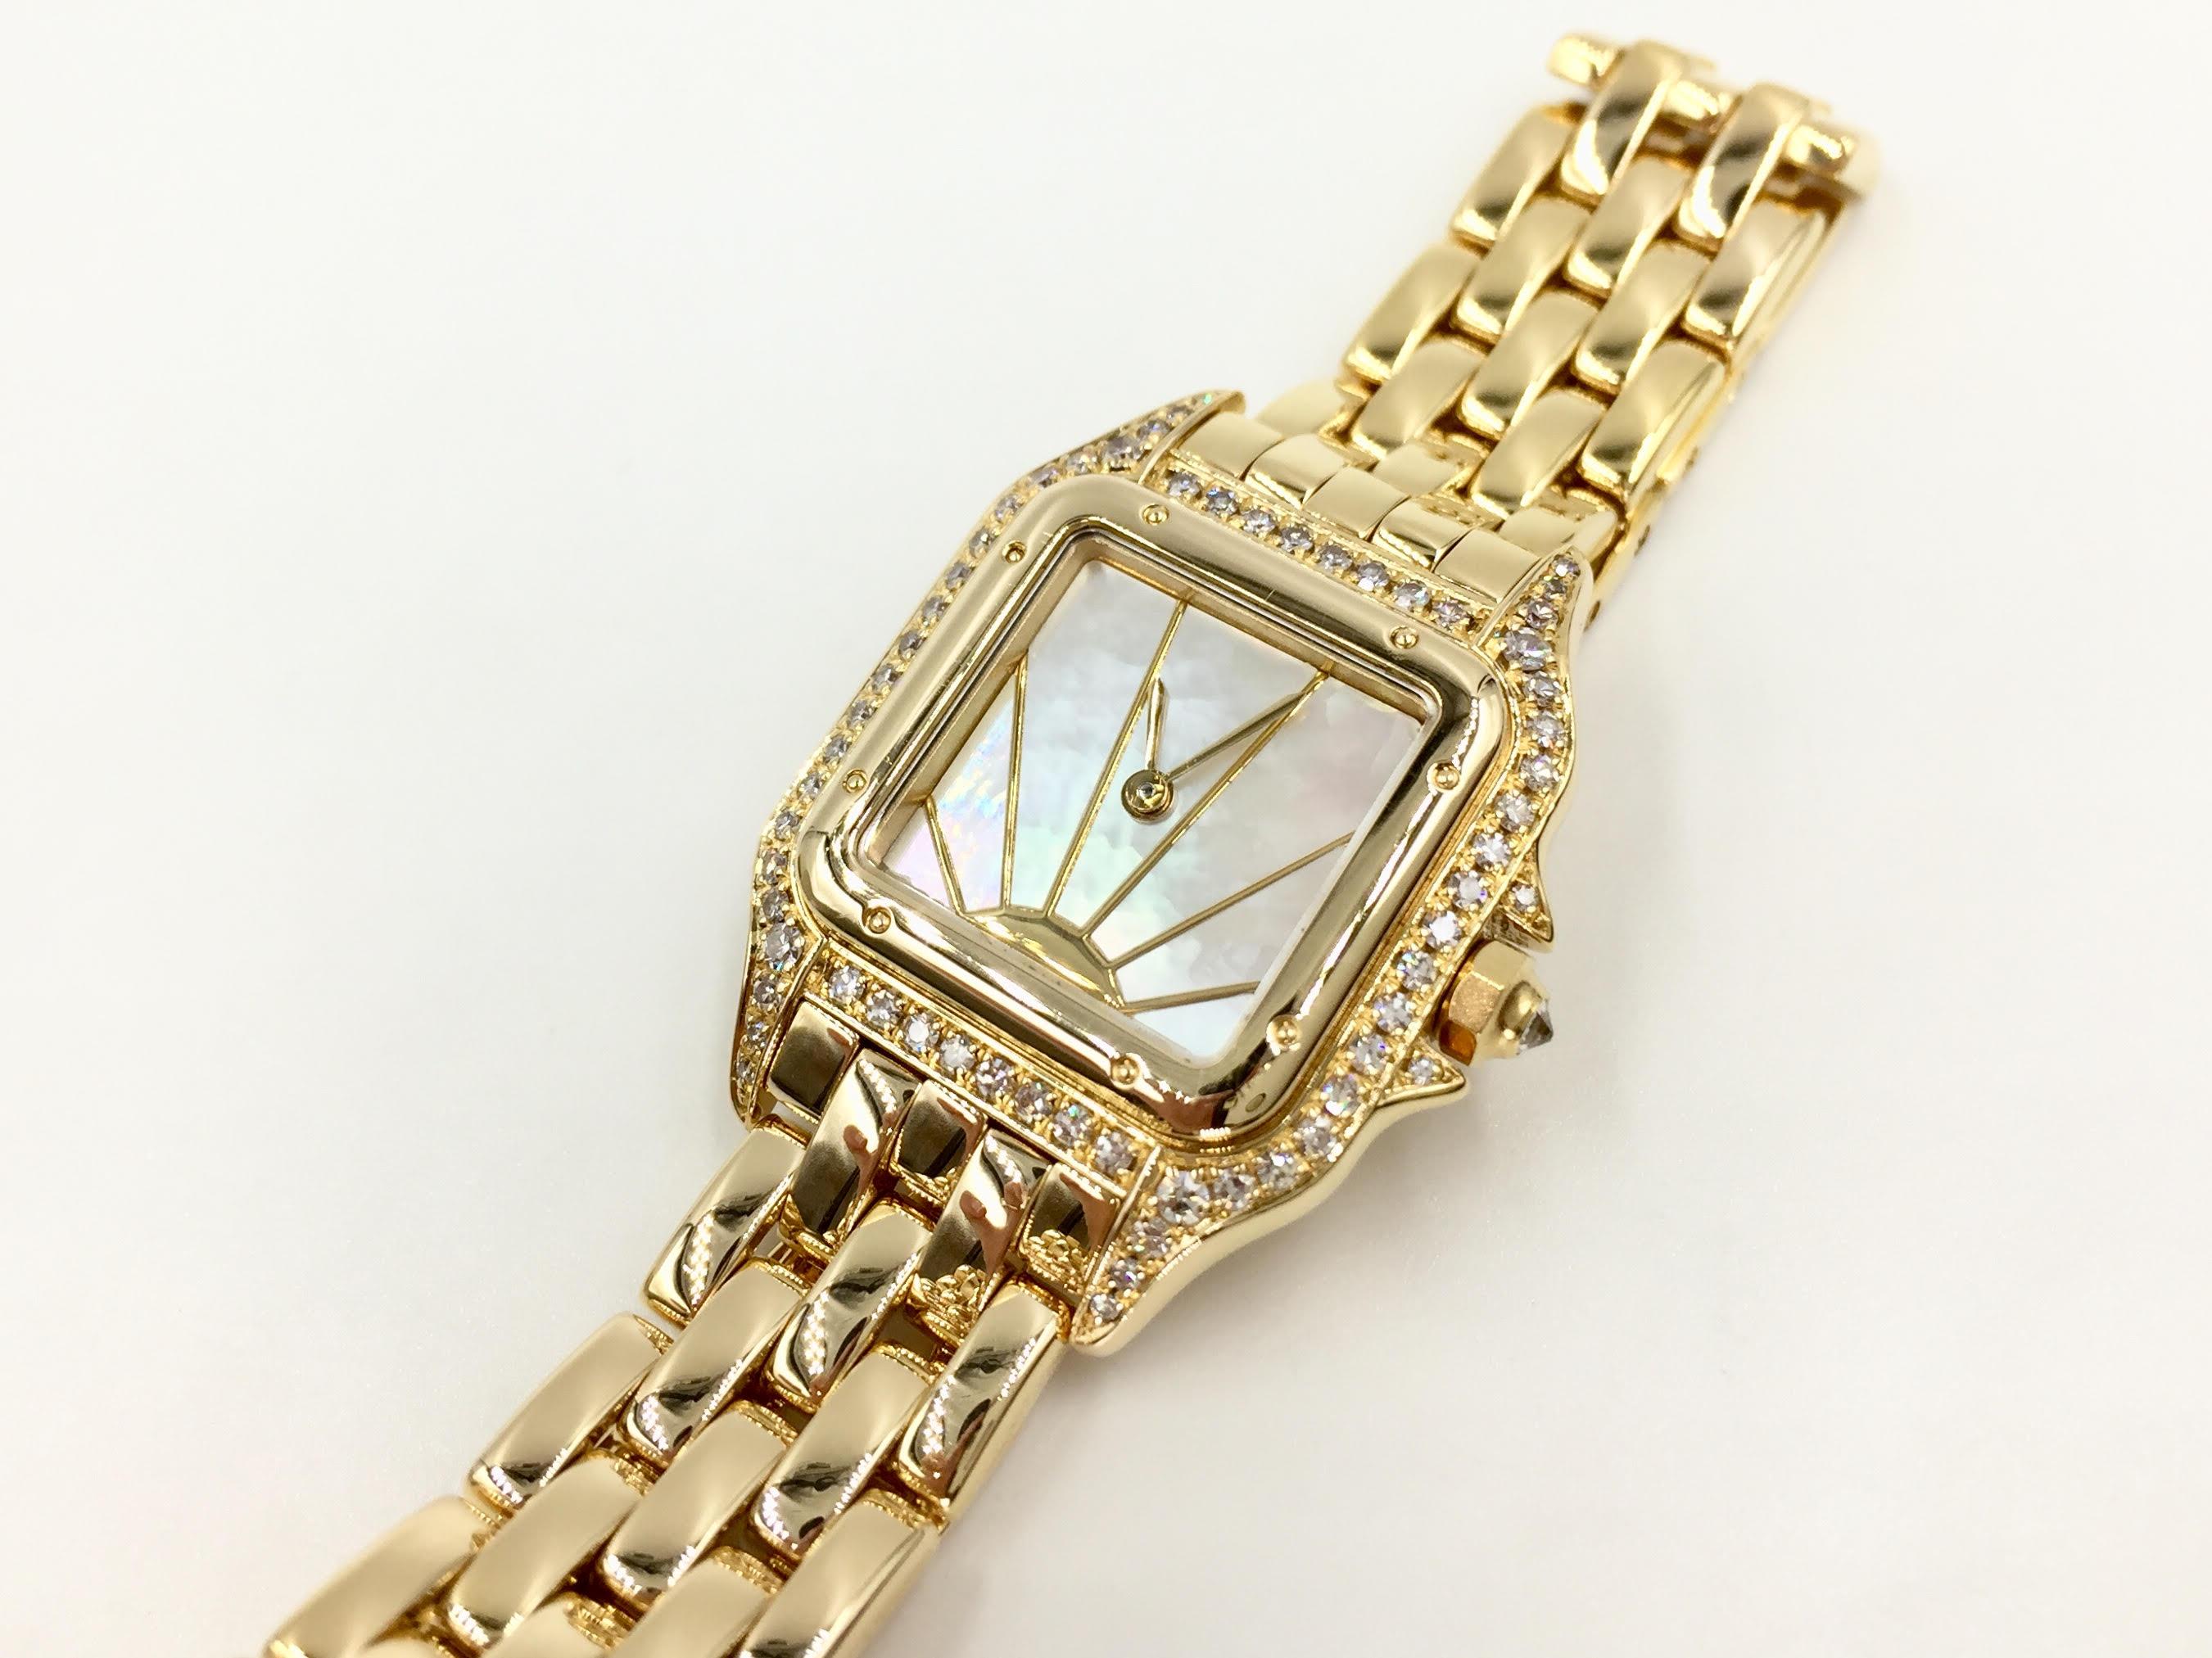 Timeless authentic Panthére De Cartier solid 18k gold watch with rare mother of pearl sunburst dial. Cartier factory diamond bezel. Width of watch is 22mm. Width of bracelet is 12mm. Double deployment clasp. Quartz movement. Battery replaced in